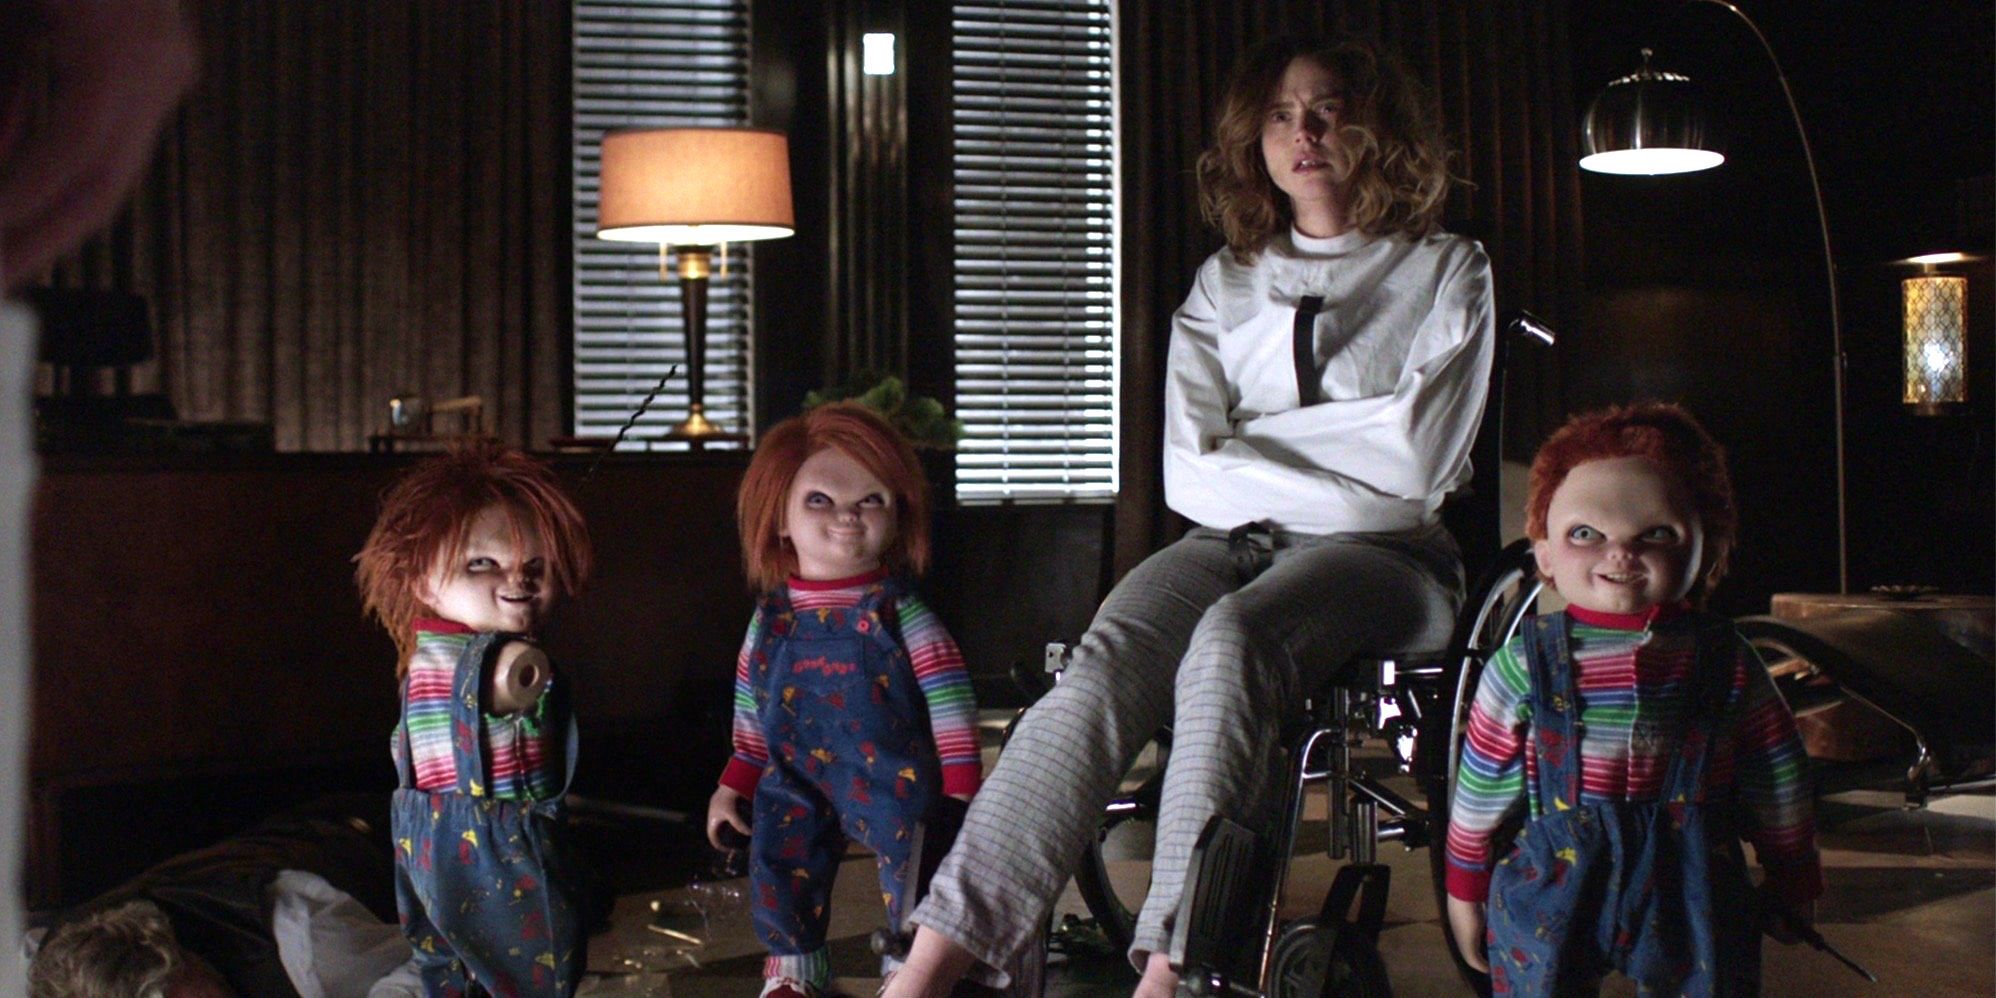 Nica and the Cult of Chucky